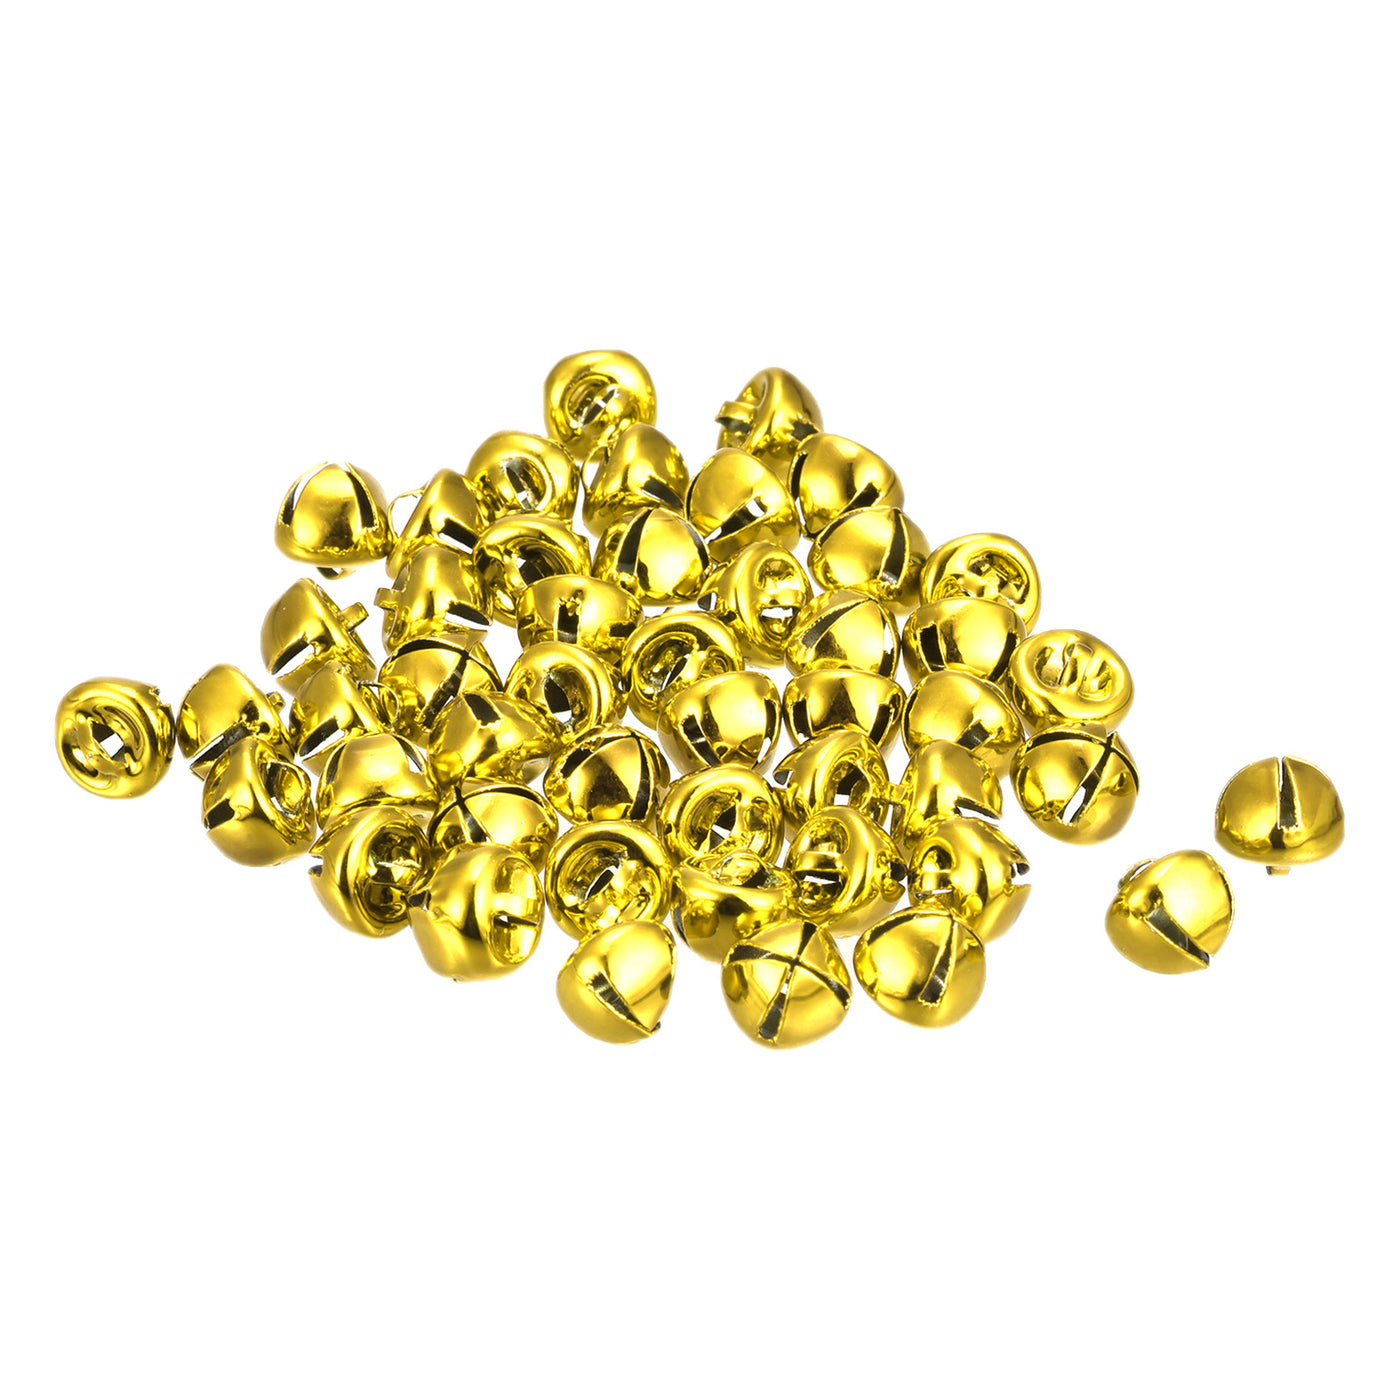 uxcell Uxcell Jingle Bells, 10mm 120pcs Small Bells for Crafts DIY Christmas, Gold Tone